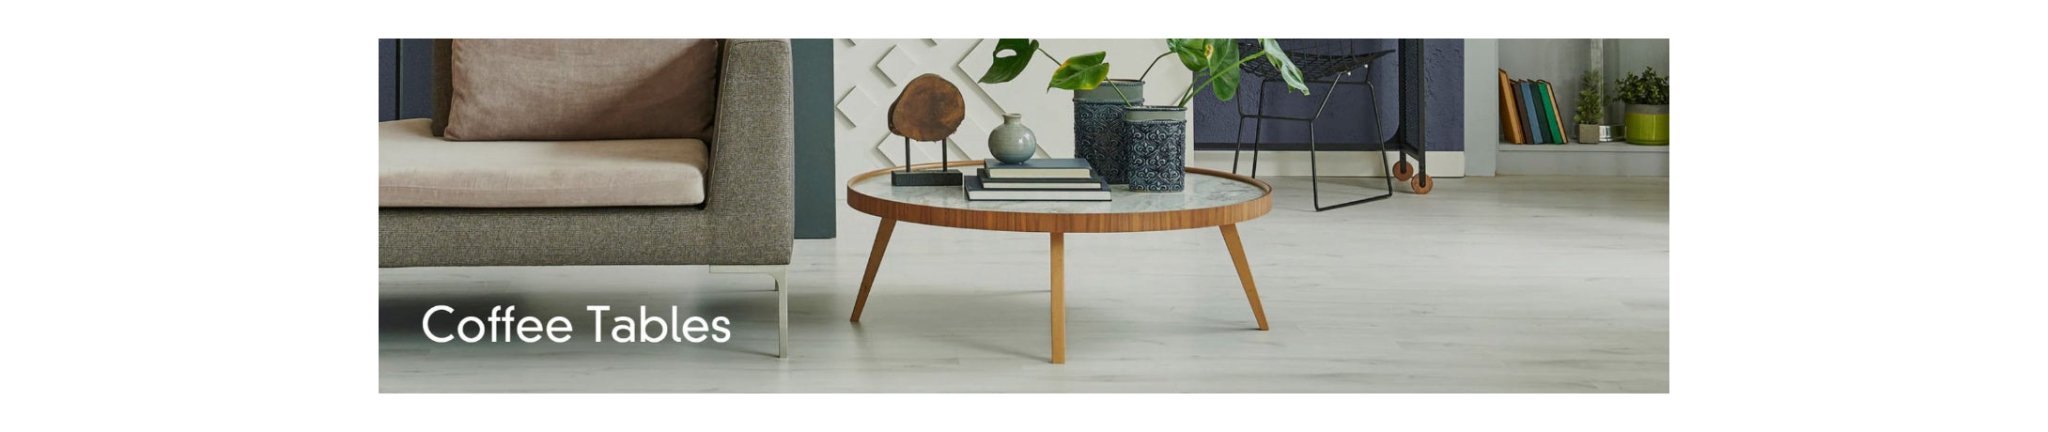 Shop Coffee Tables for Every Living Space - Newstart Furniture